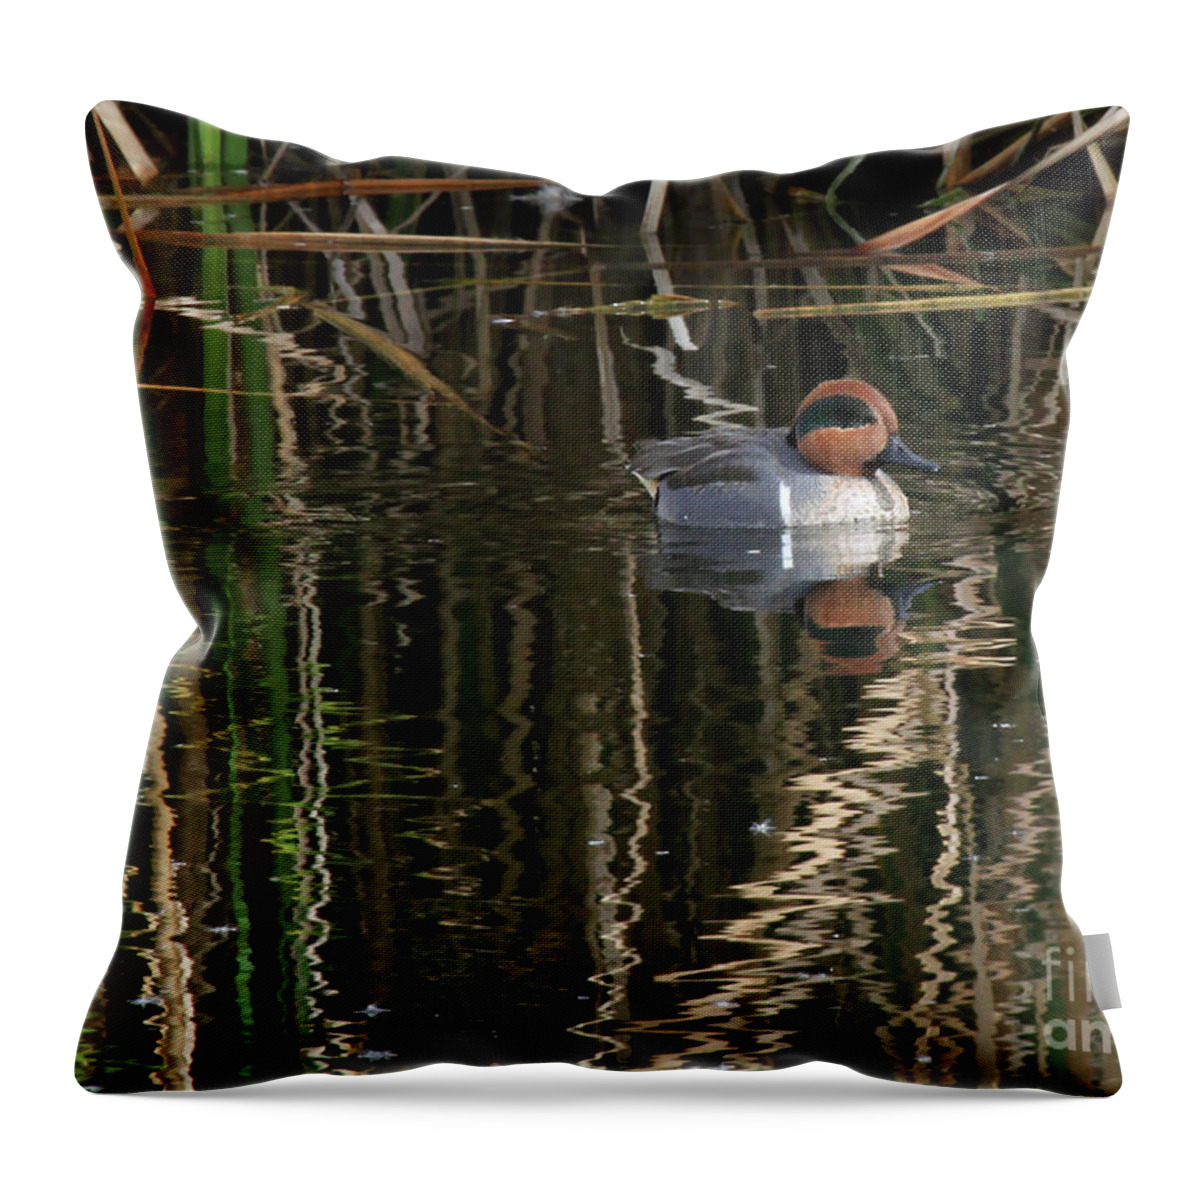 Green Winged Teal Throw Pillow featuring the photograph Green Winged Teal by Paula Guttilla